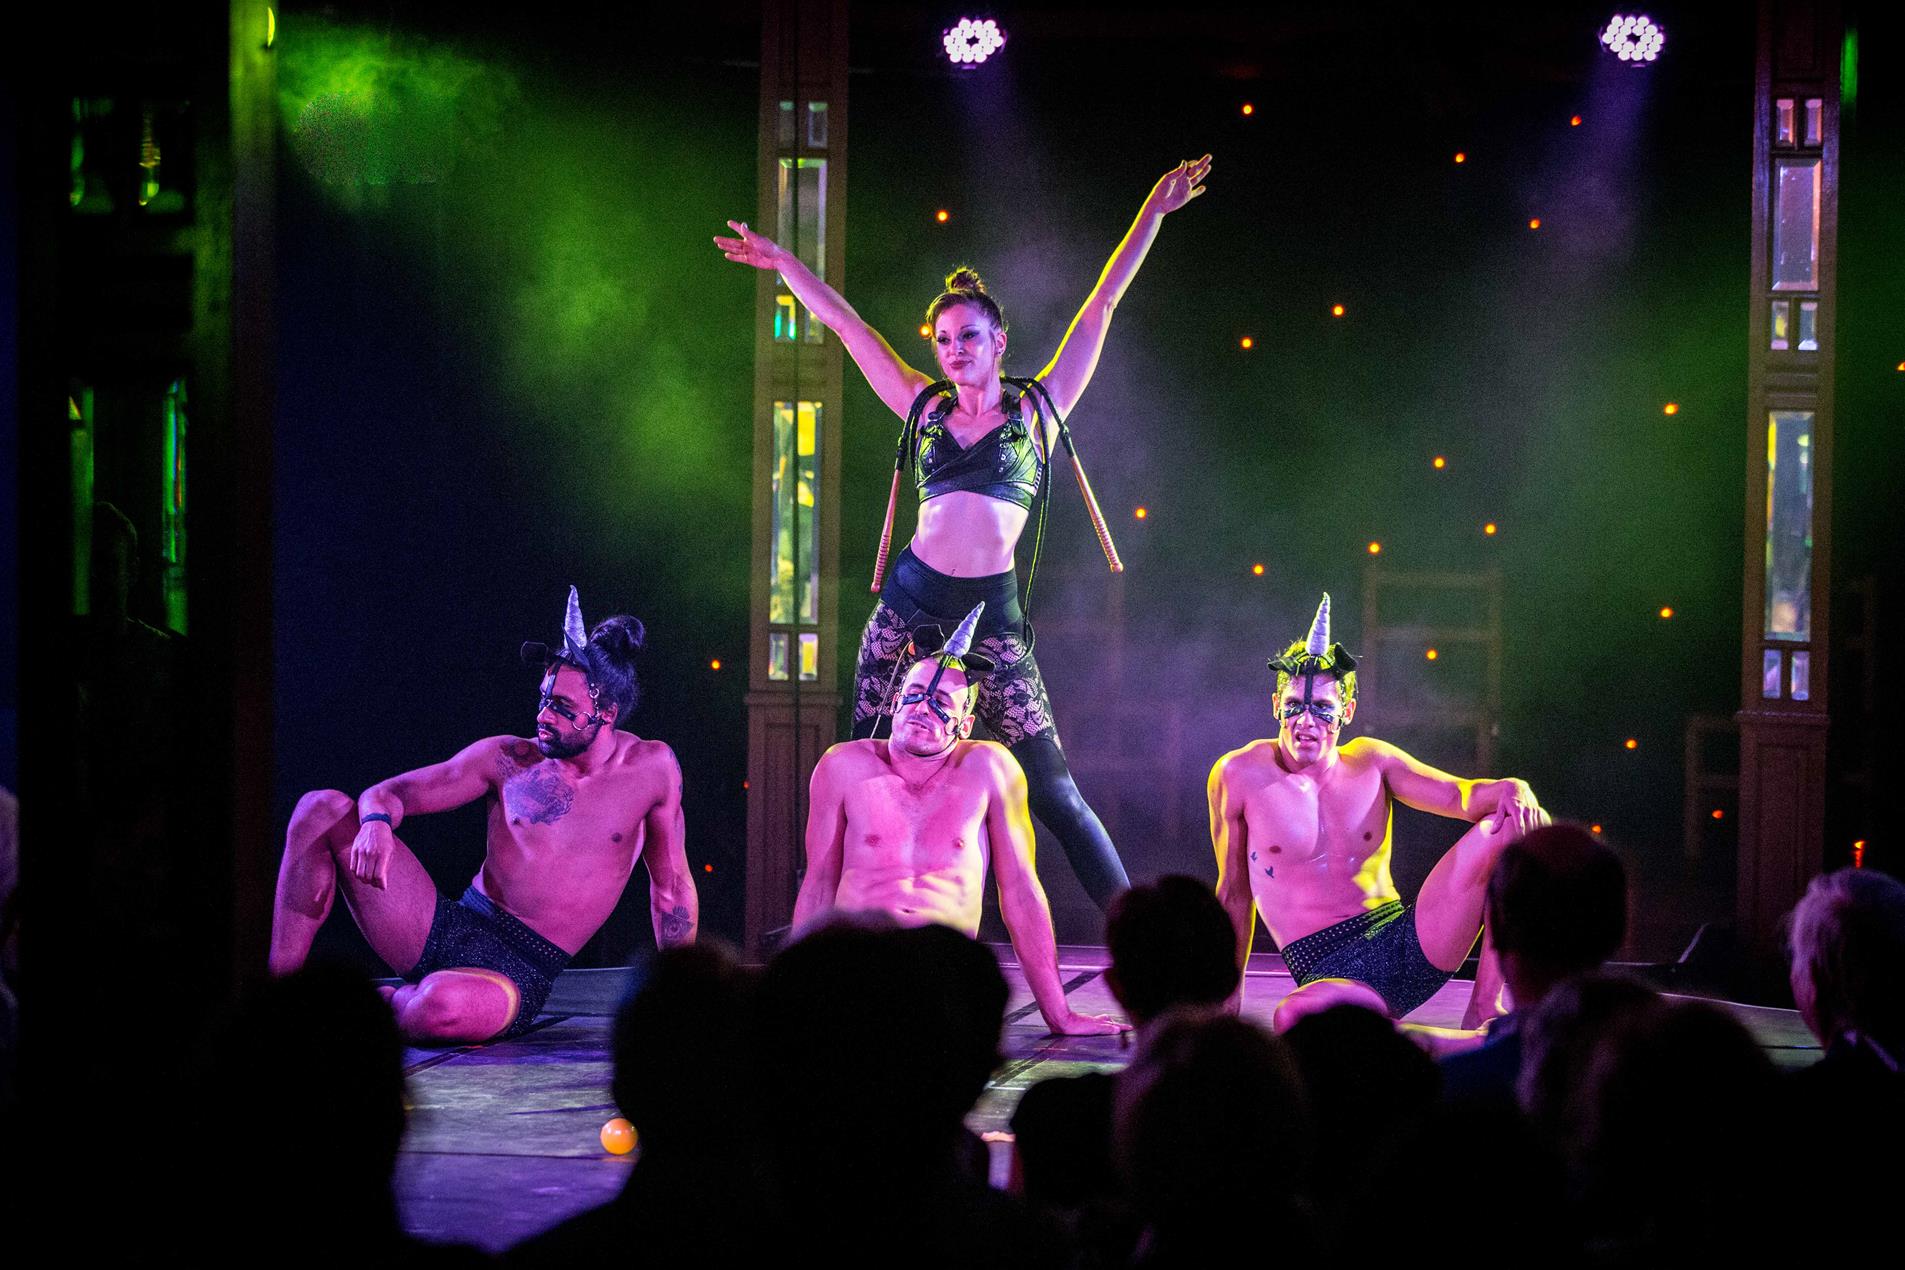 Female dancer in black outfit performing with three male dancers on stage.